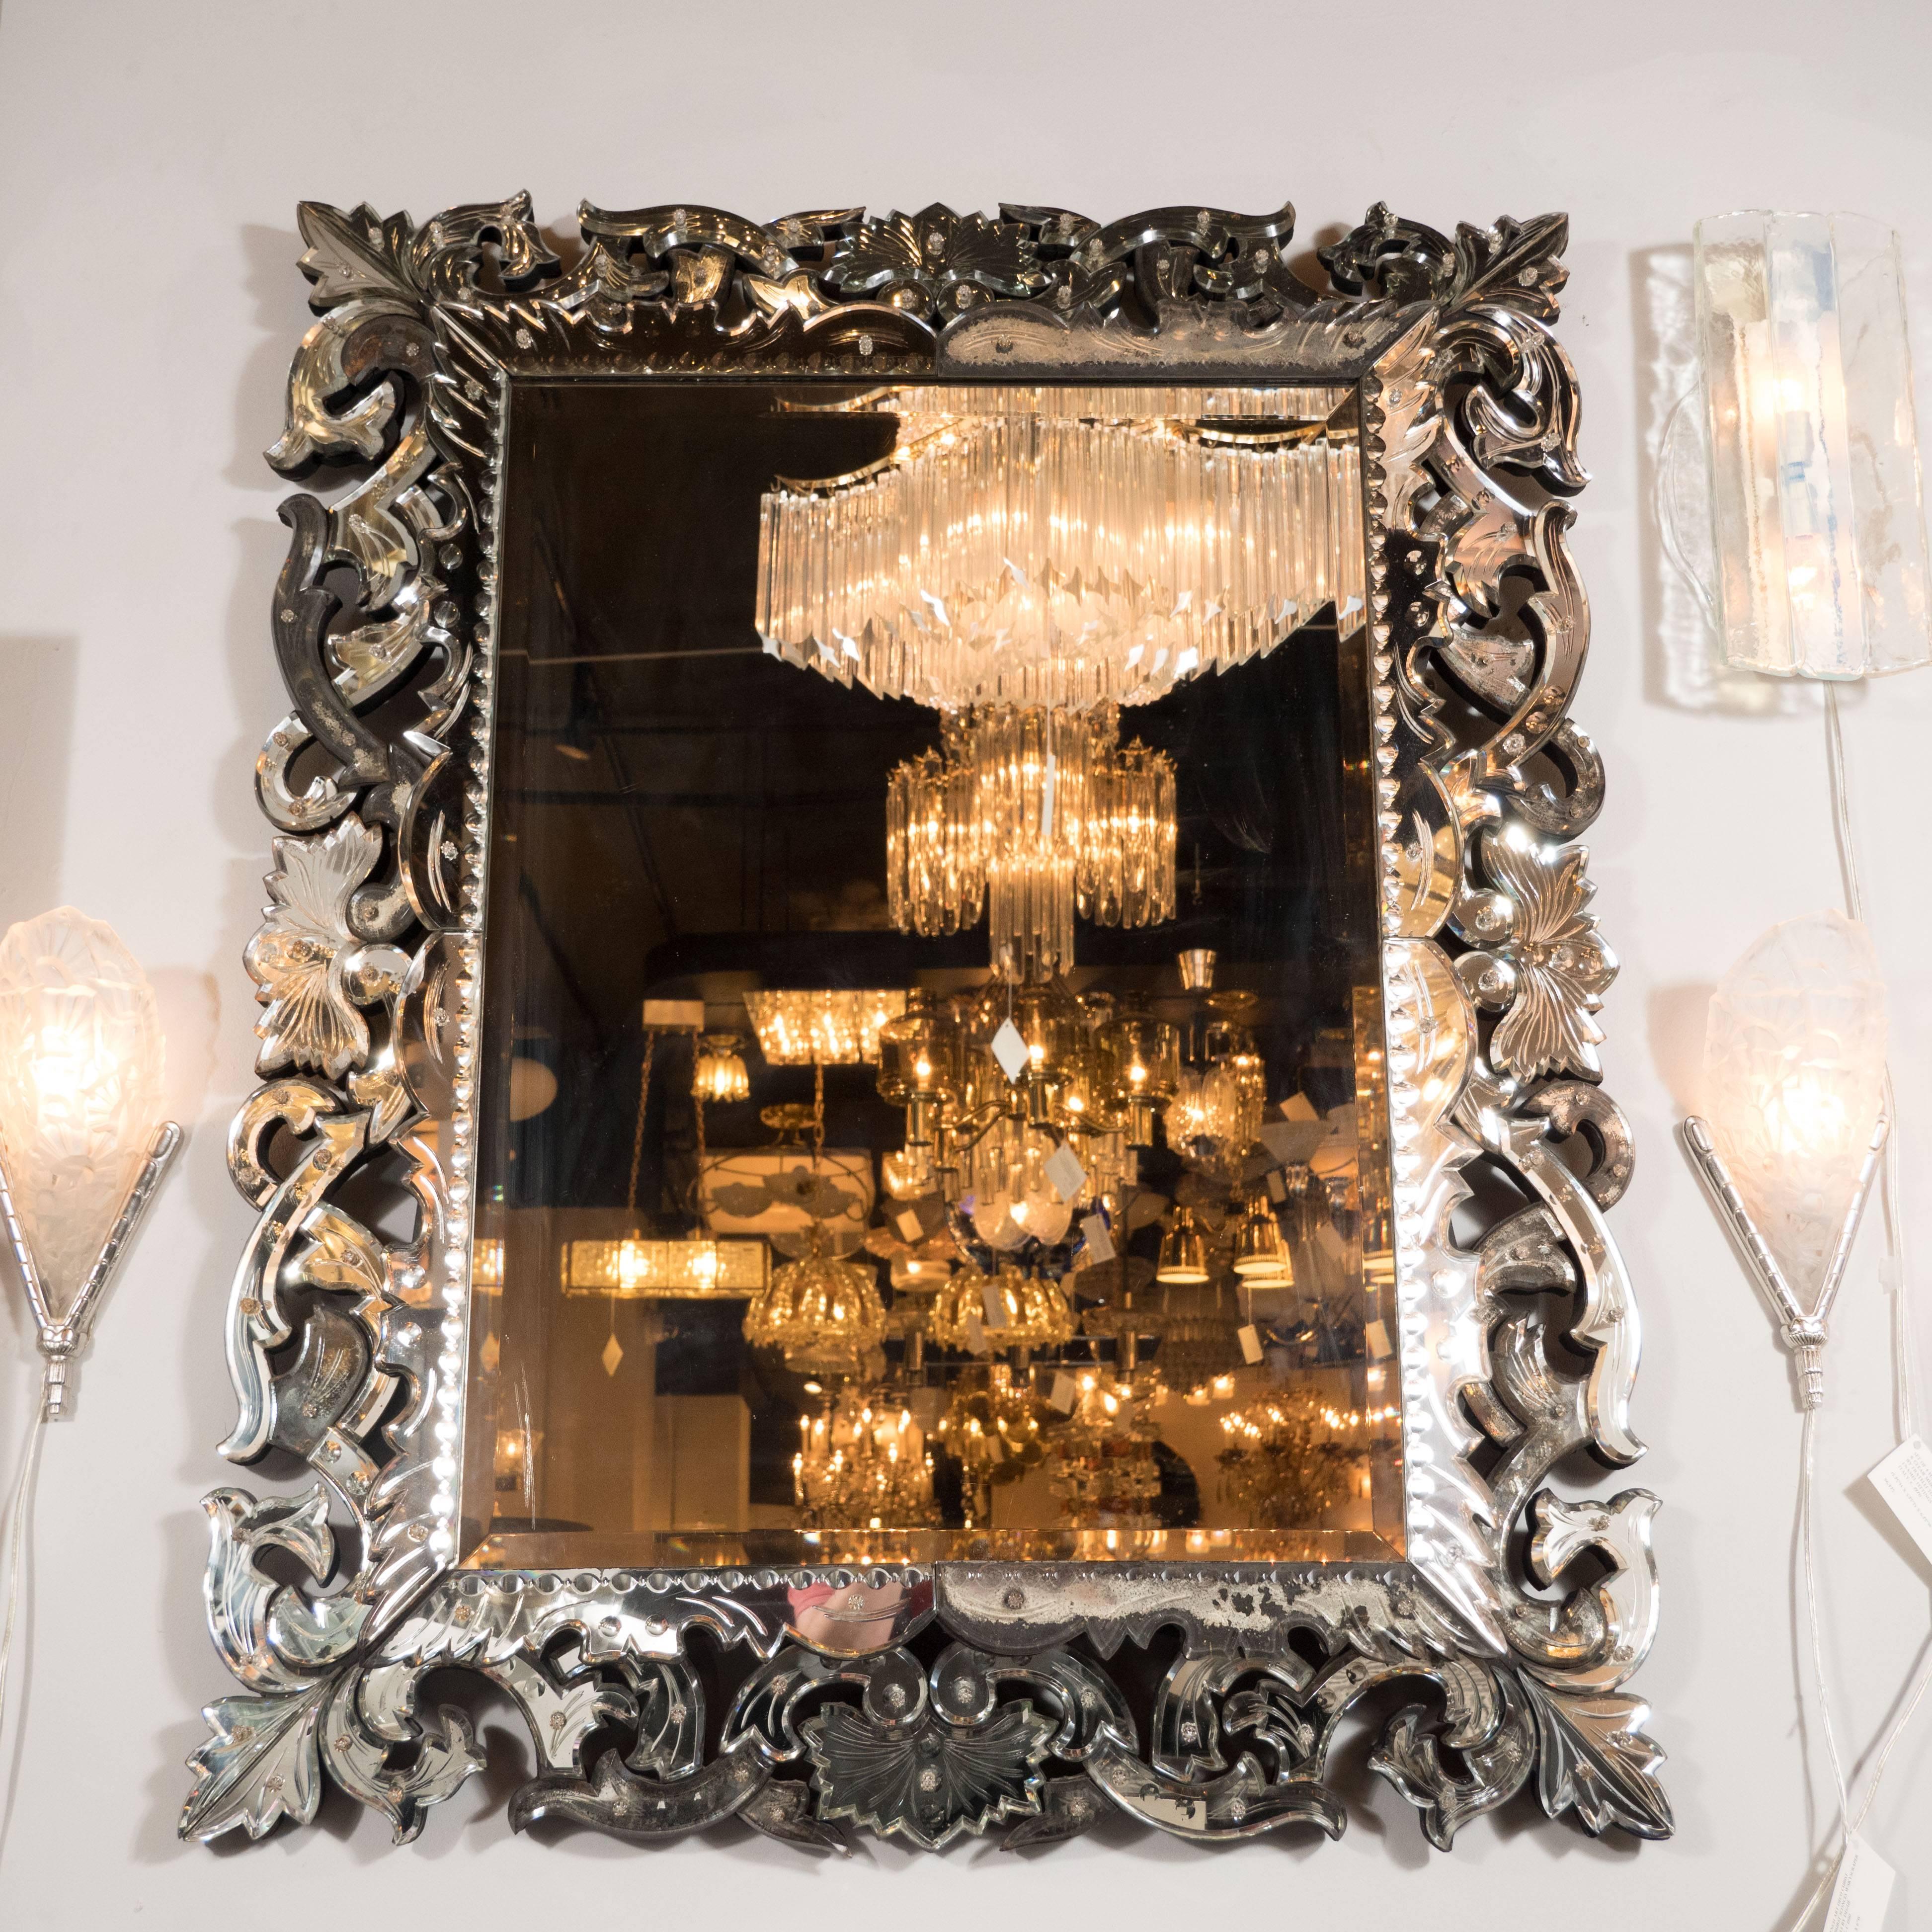 This stunning mirror was realized in France, circa 1925. It features chain beveling around the perimeter, and a stylized flame motif consisting of an abundance of abstracted forms cut from mirrored glass emanating from the square center. There is a